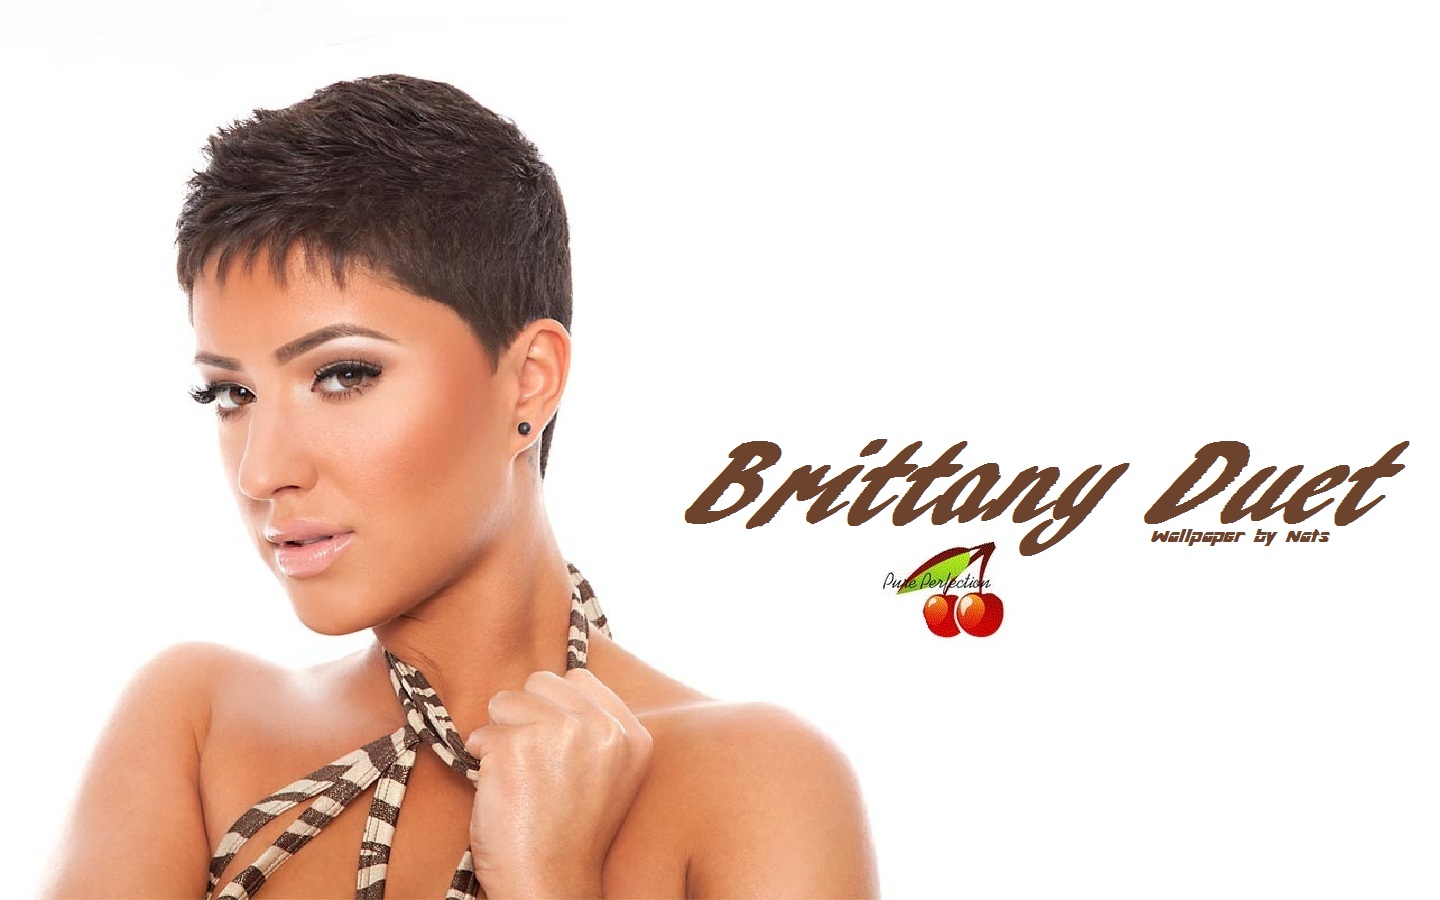 Download full size Brittany Duet wallpaper / Celebrities Female / 1440x900